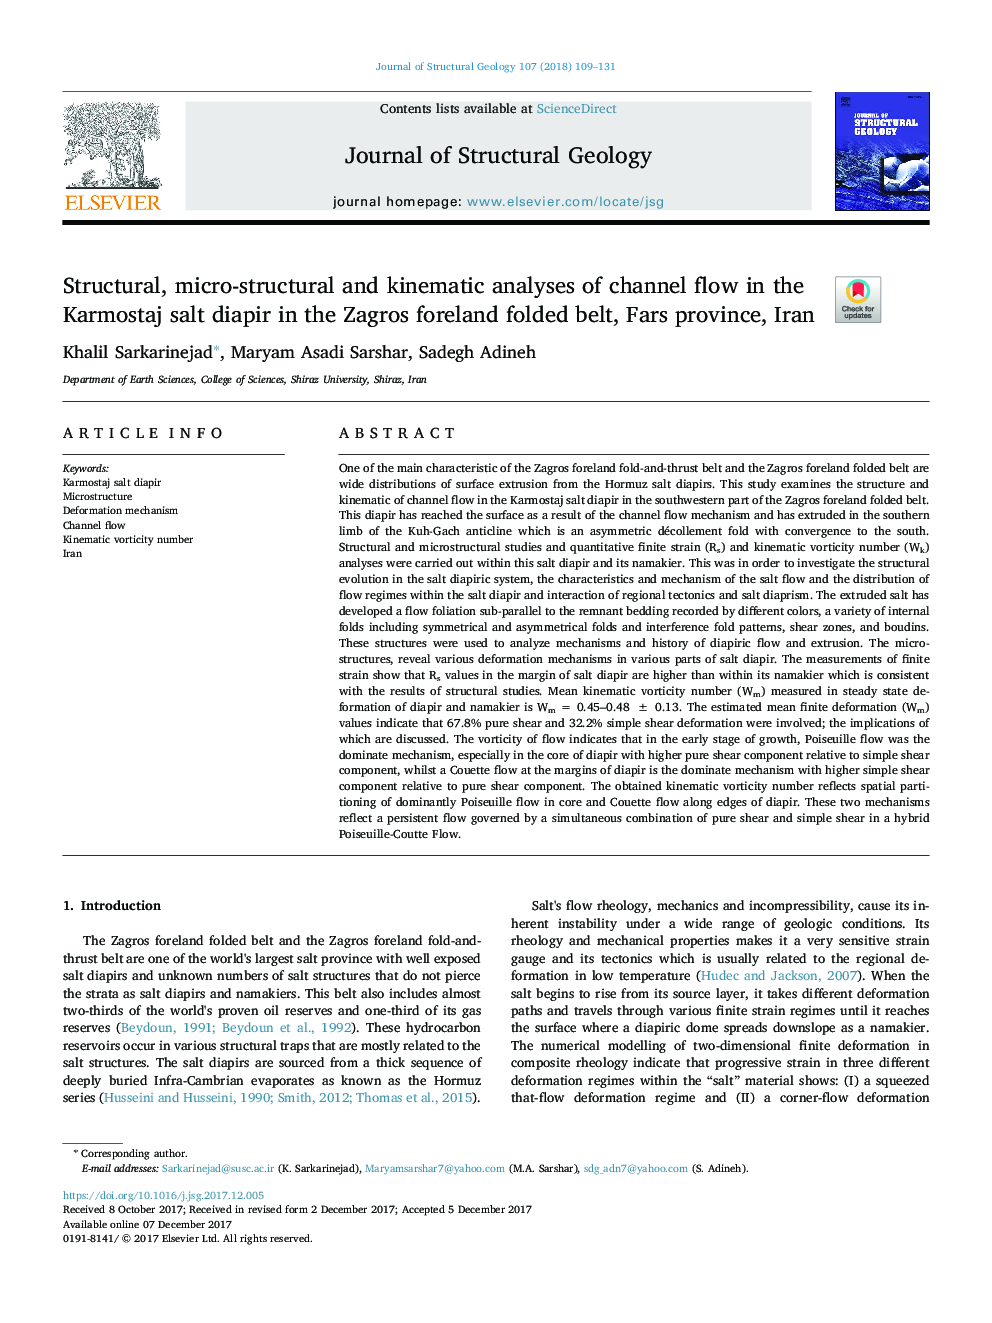 Structural, micro-structural and kinematic analyses of channel flow in the Karmostaj salt diapir in the Zagros foreland folded belt, Fars province, Iran